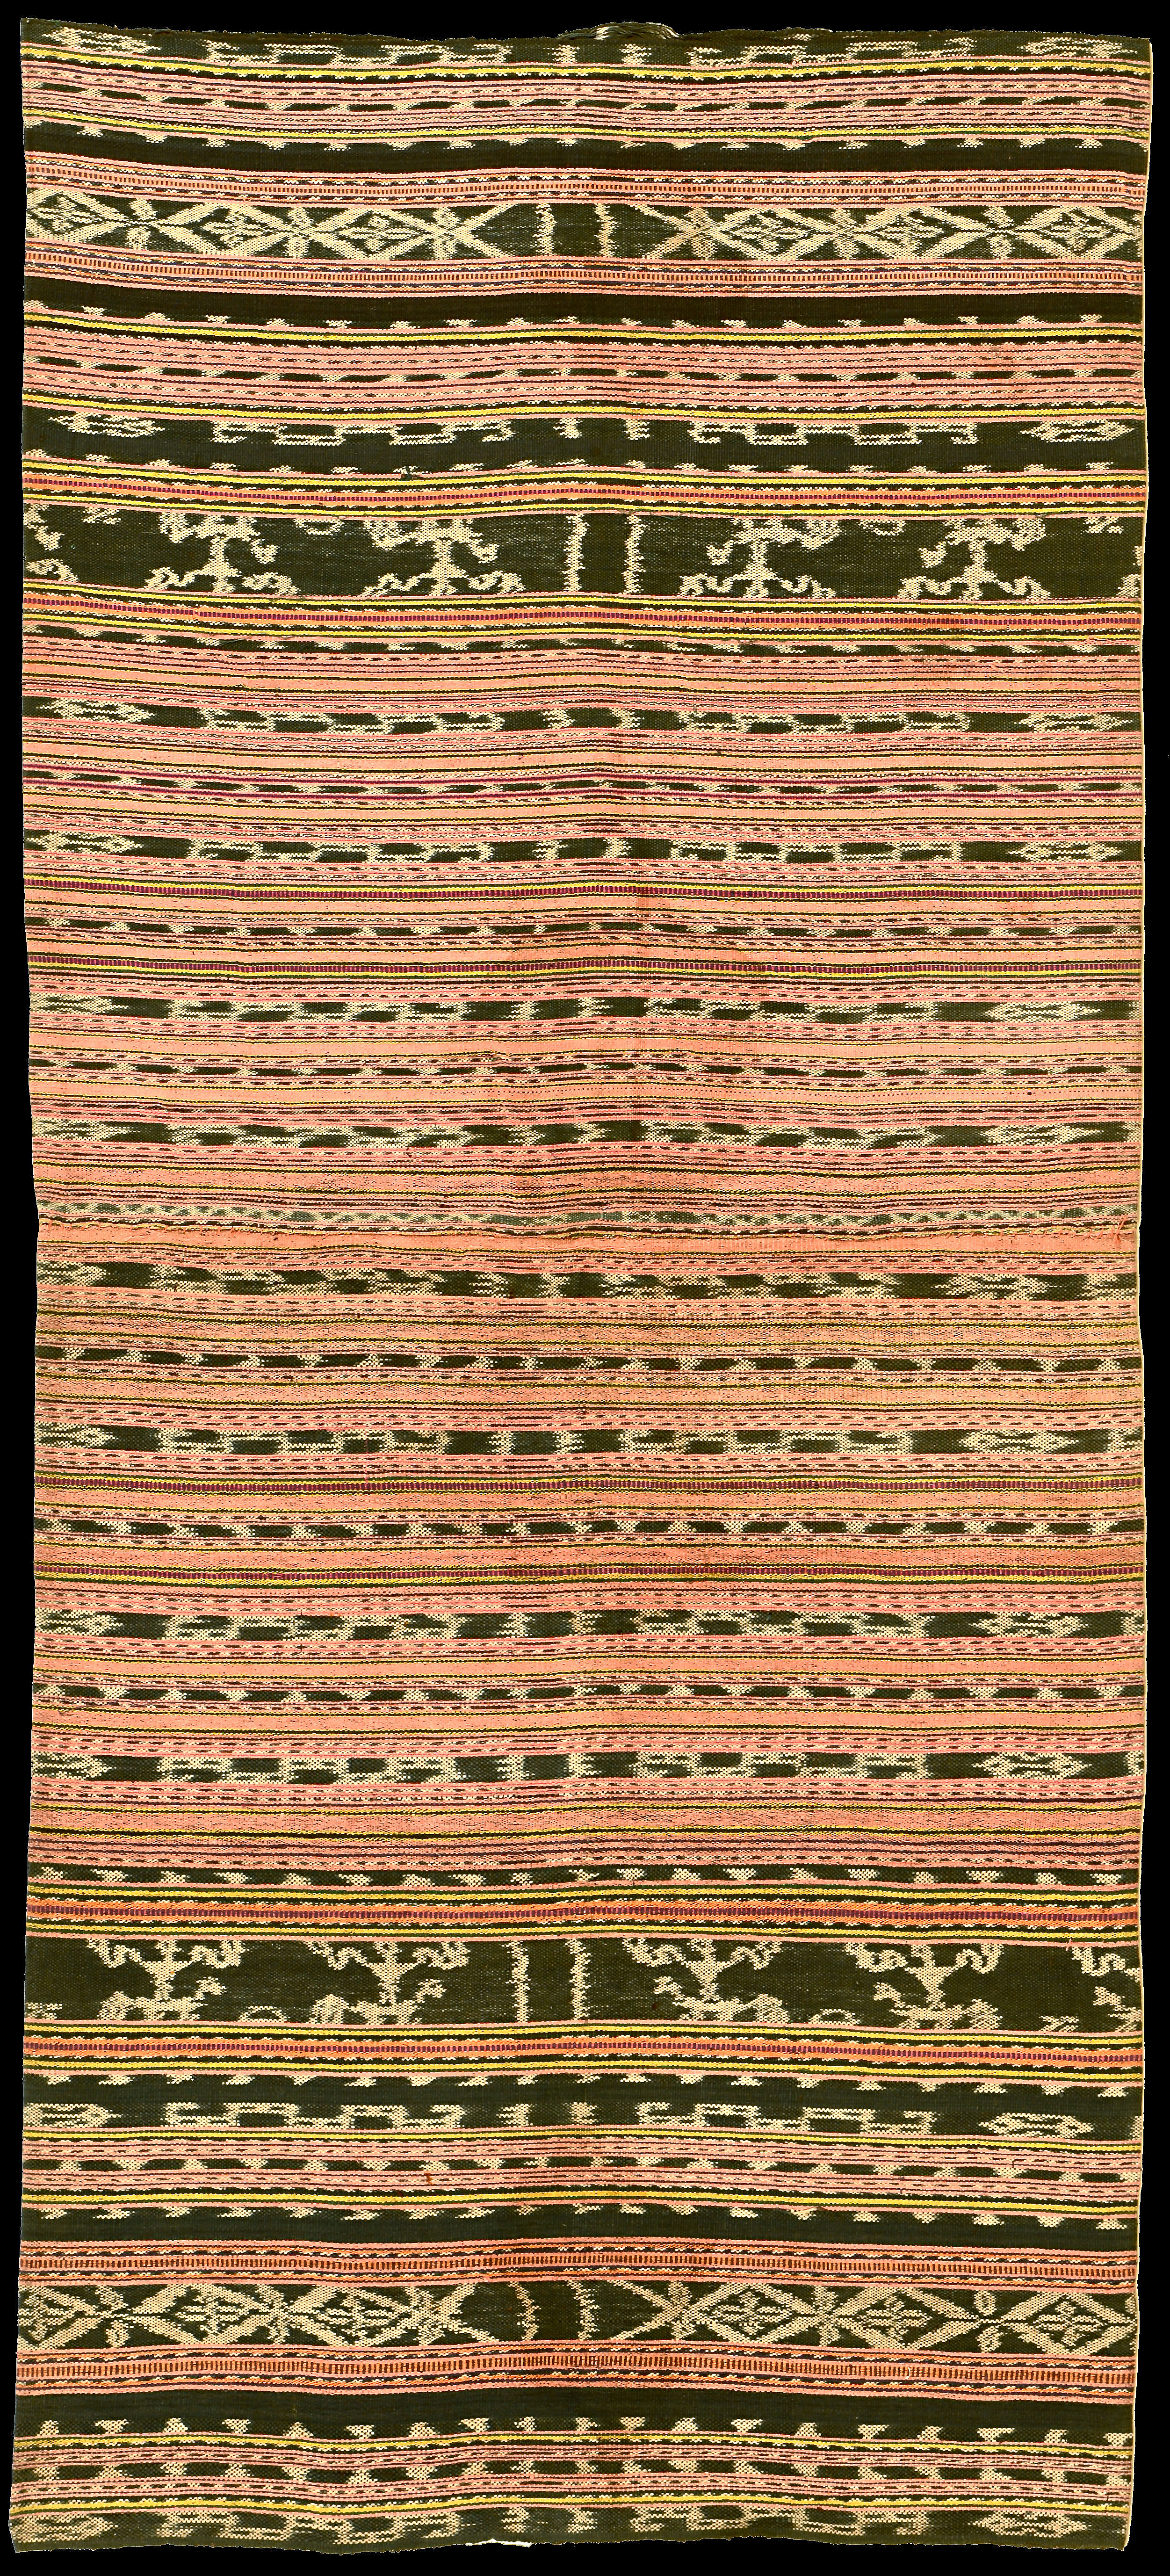 Ikat from Romang, Moluccas, Indonesia